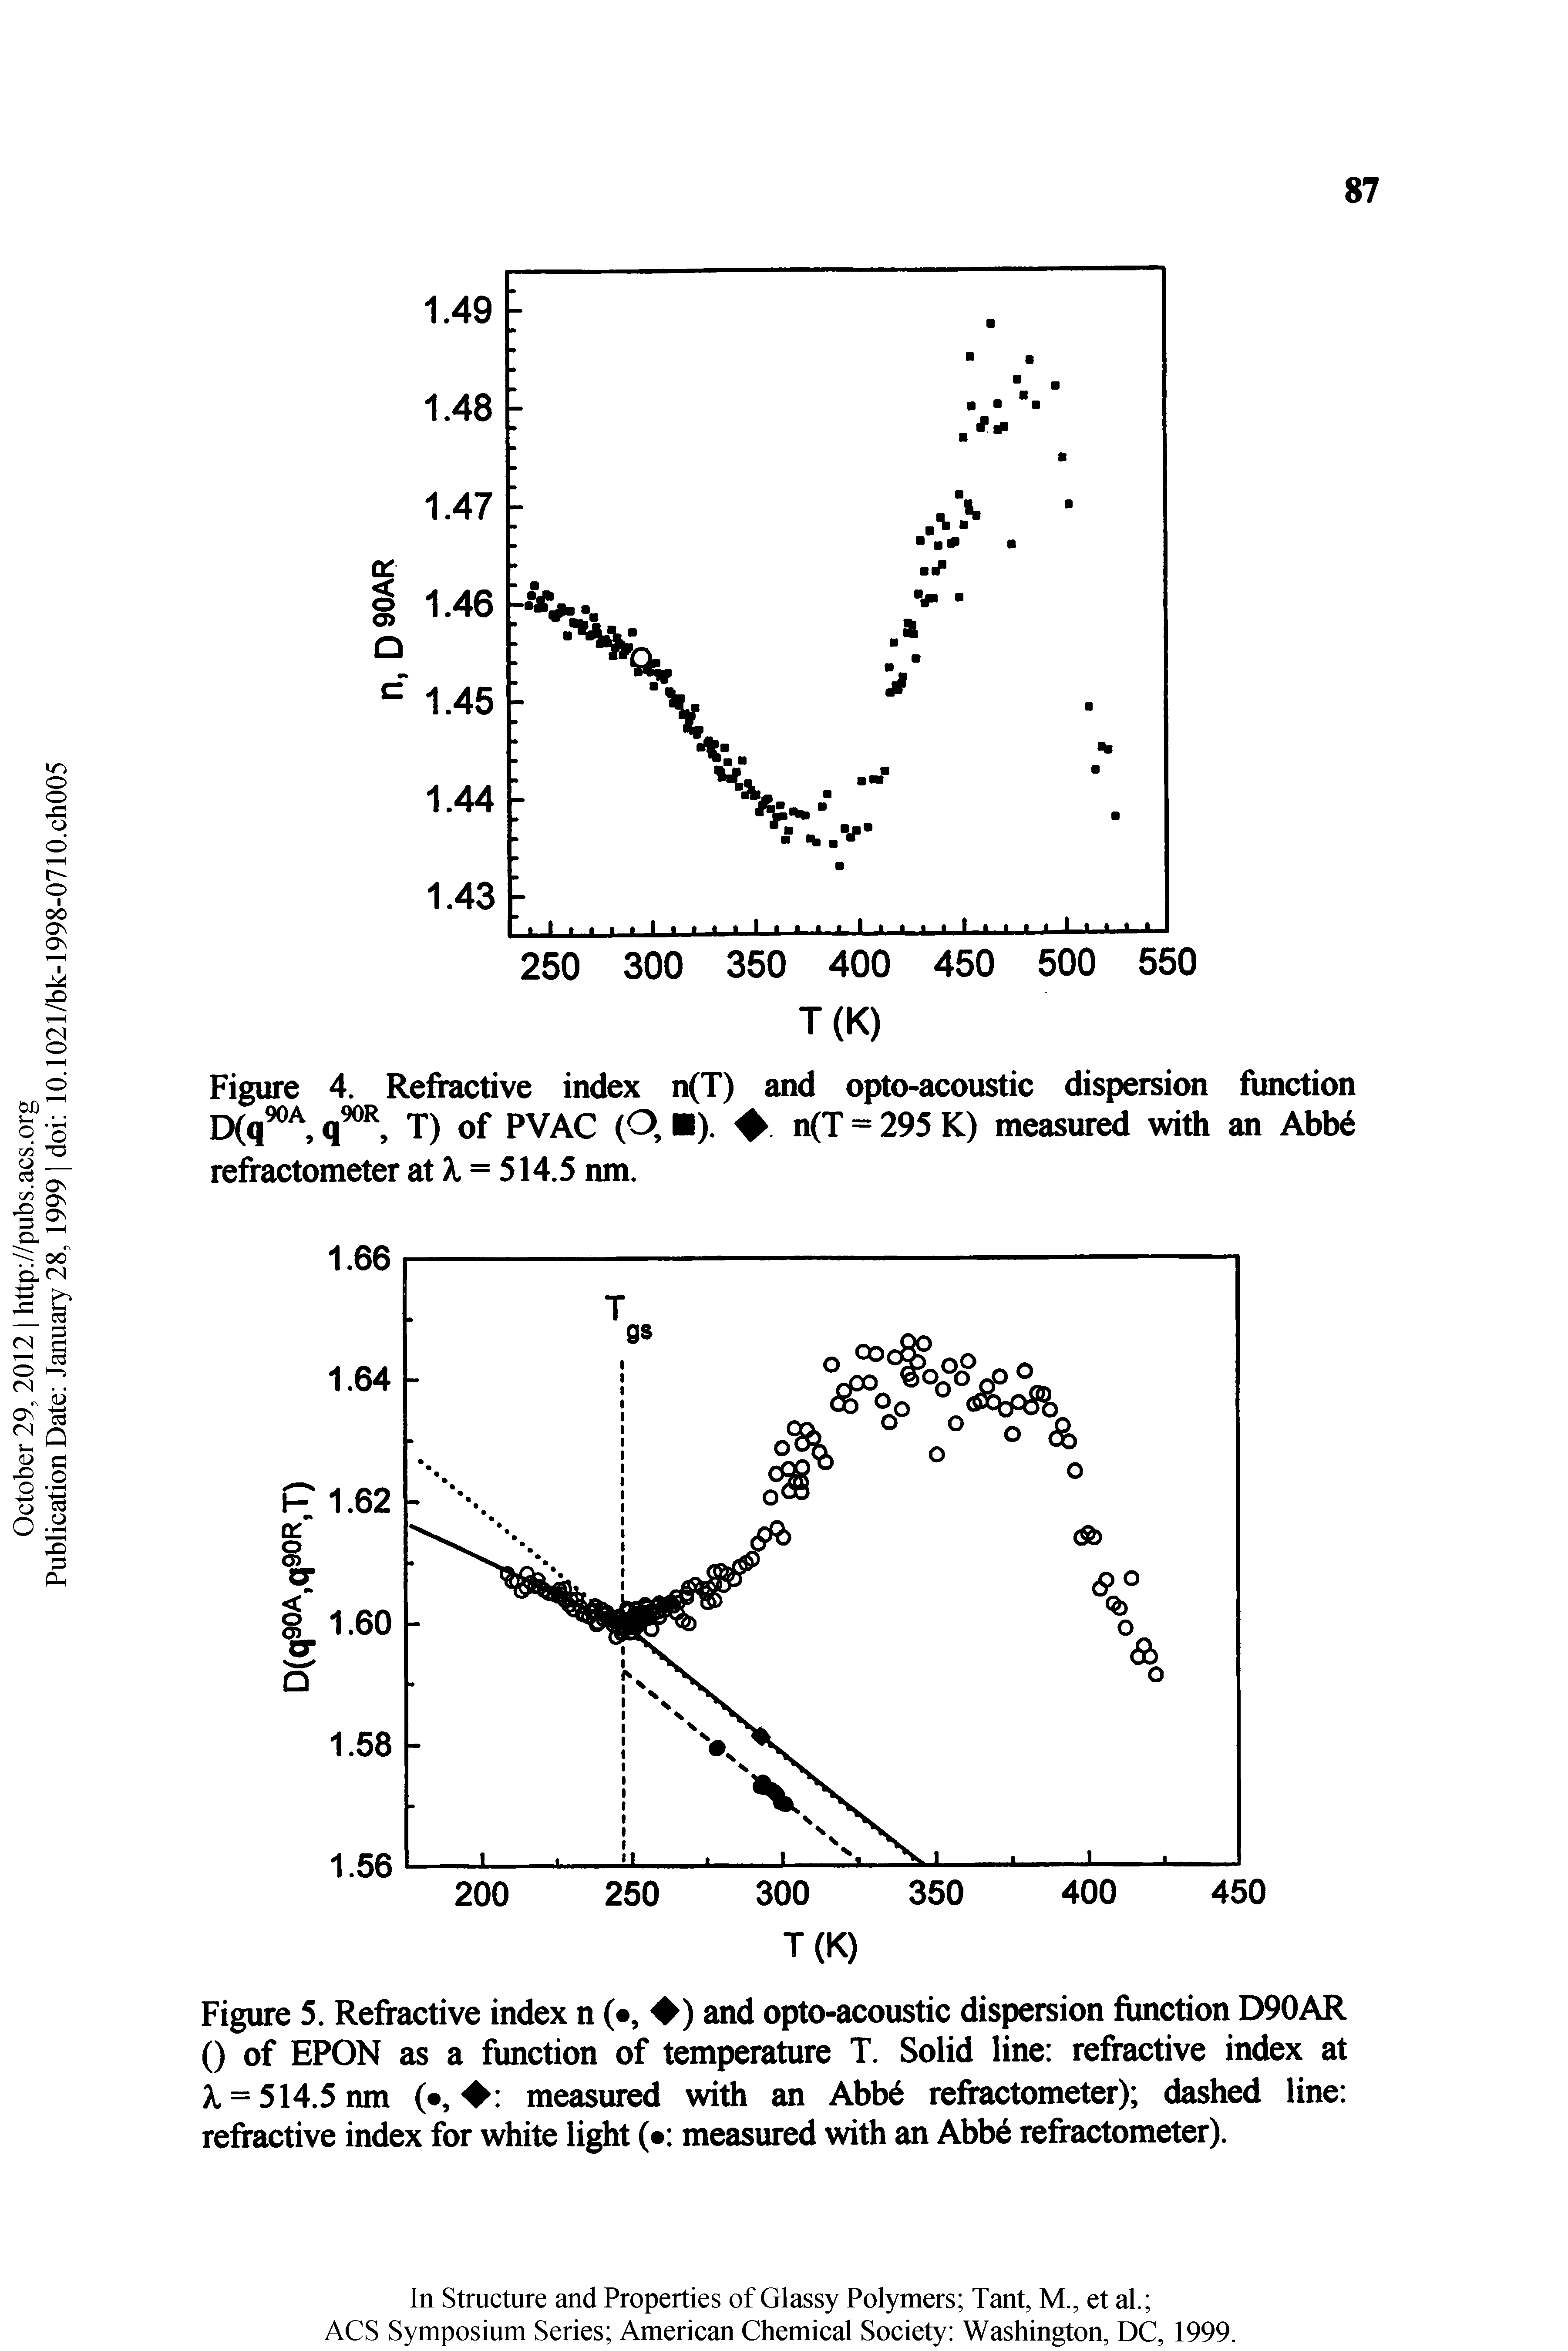 Figure 4. Refractive index n(T) and opto-acoustic dispersion function E)(q °, T) of PVAC (O, ). n(T = 295 K) measured with an AbW refractometer at A, = 514.5 nm.